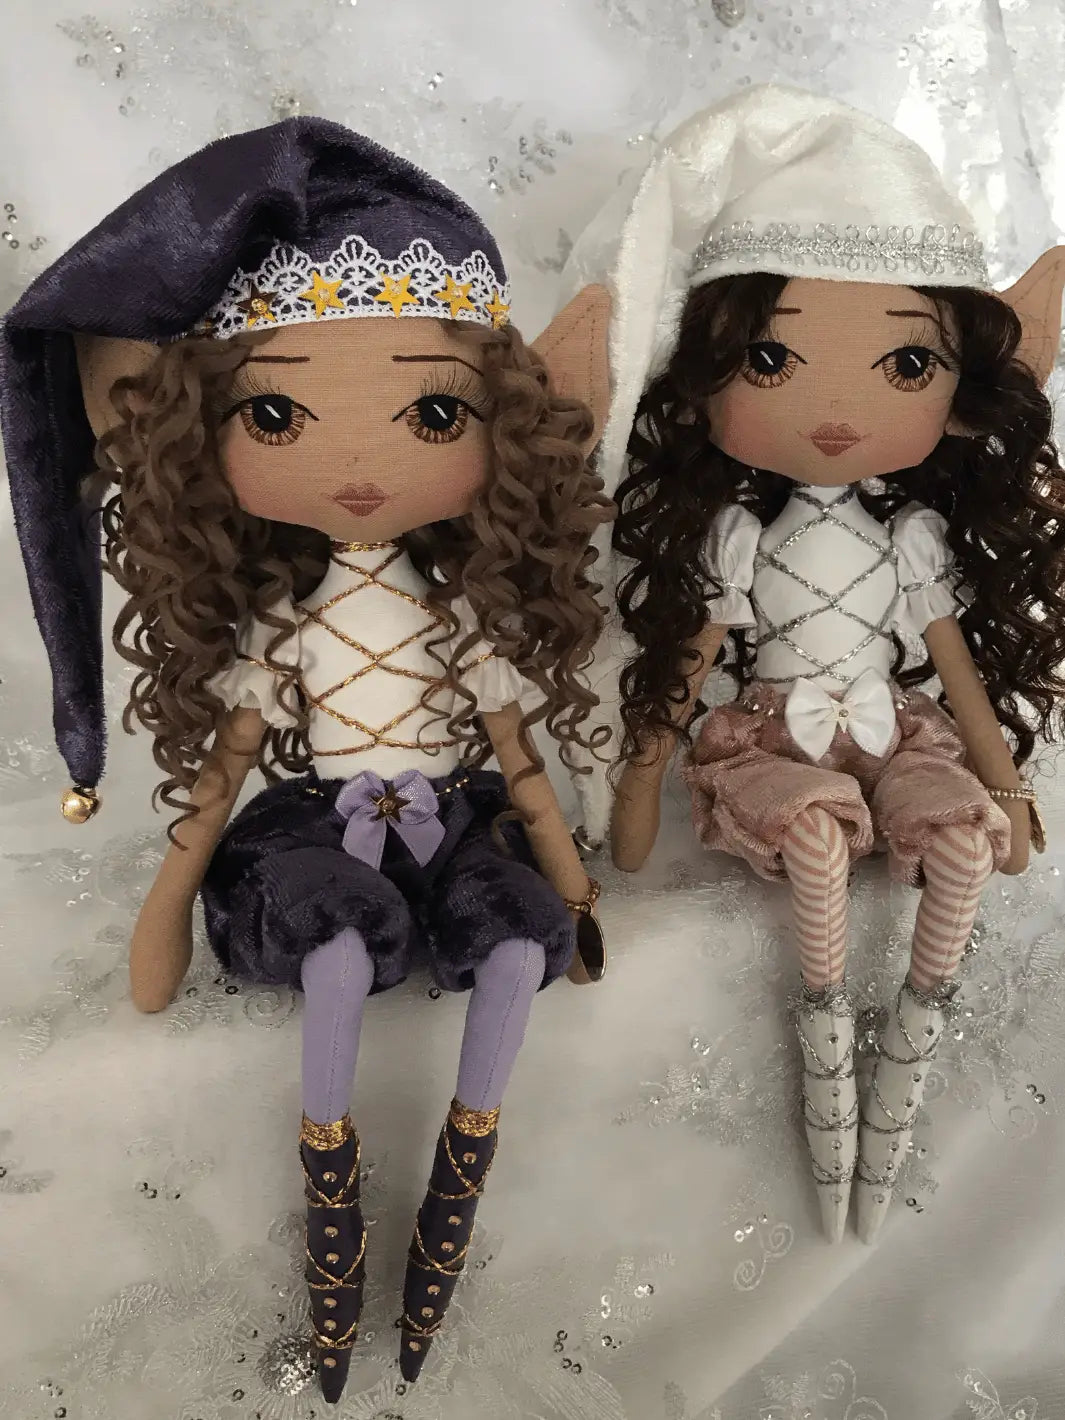 two cheeky christmas elf handmade dolls sitting on a shelf. One is purple tones with brown eyes and brown curly hair, the other is white with pink pants, long dark curly hair and brown eyes